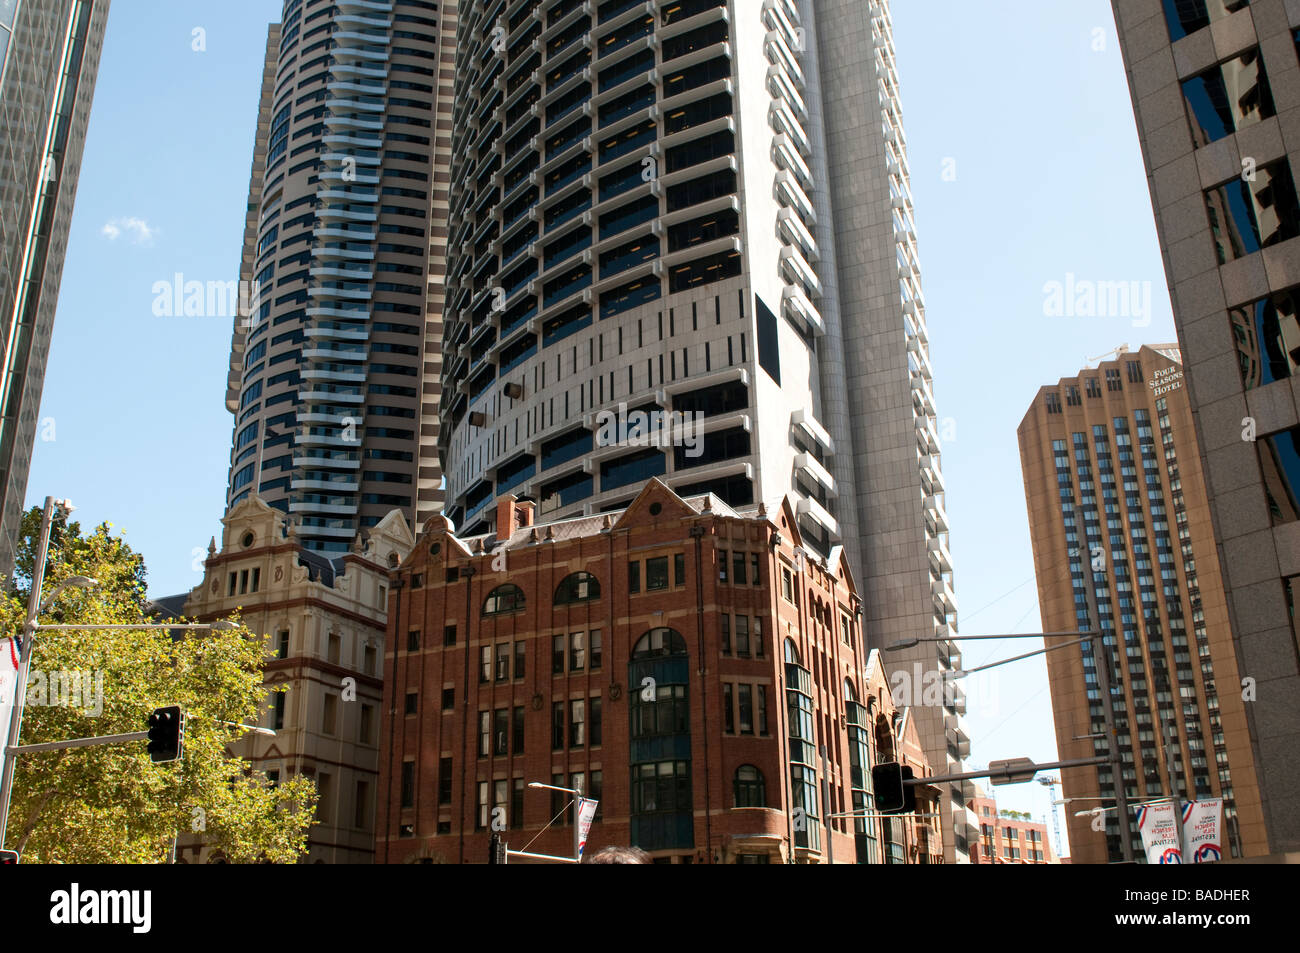 Old And New Buildings On George Street Central Business District Sydney